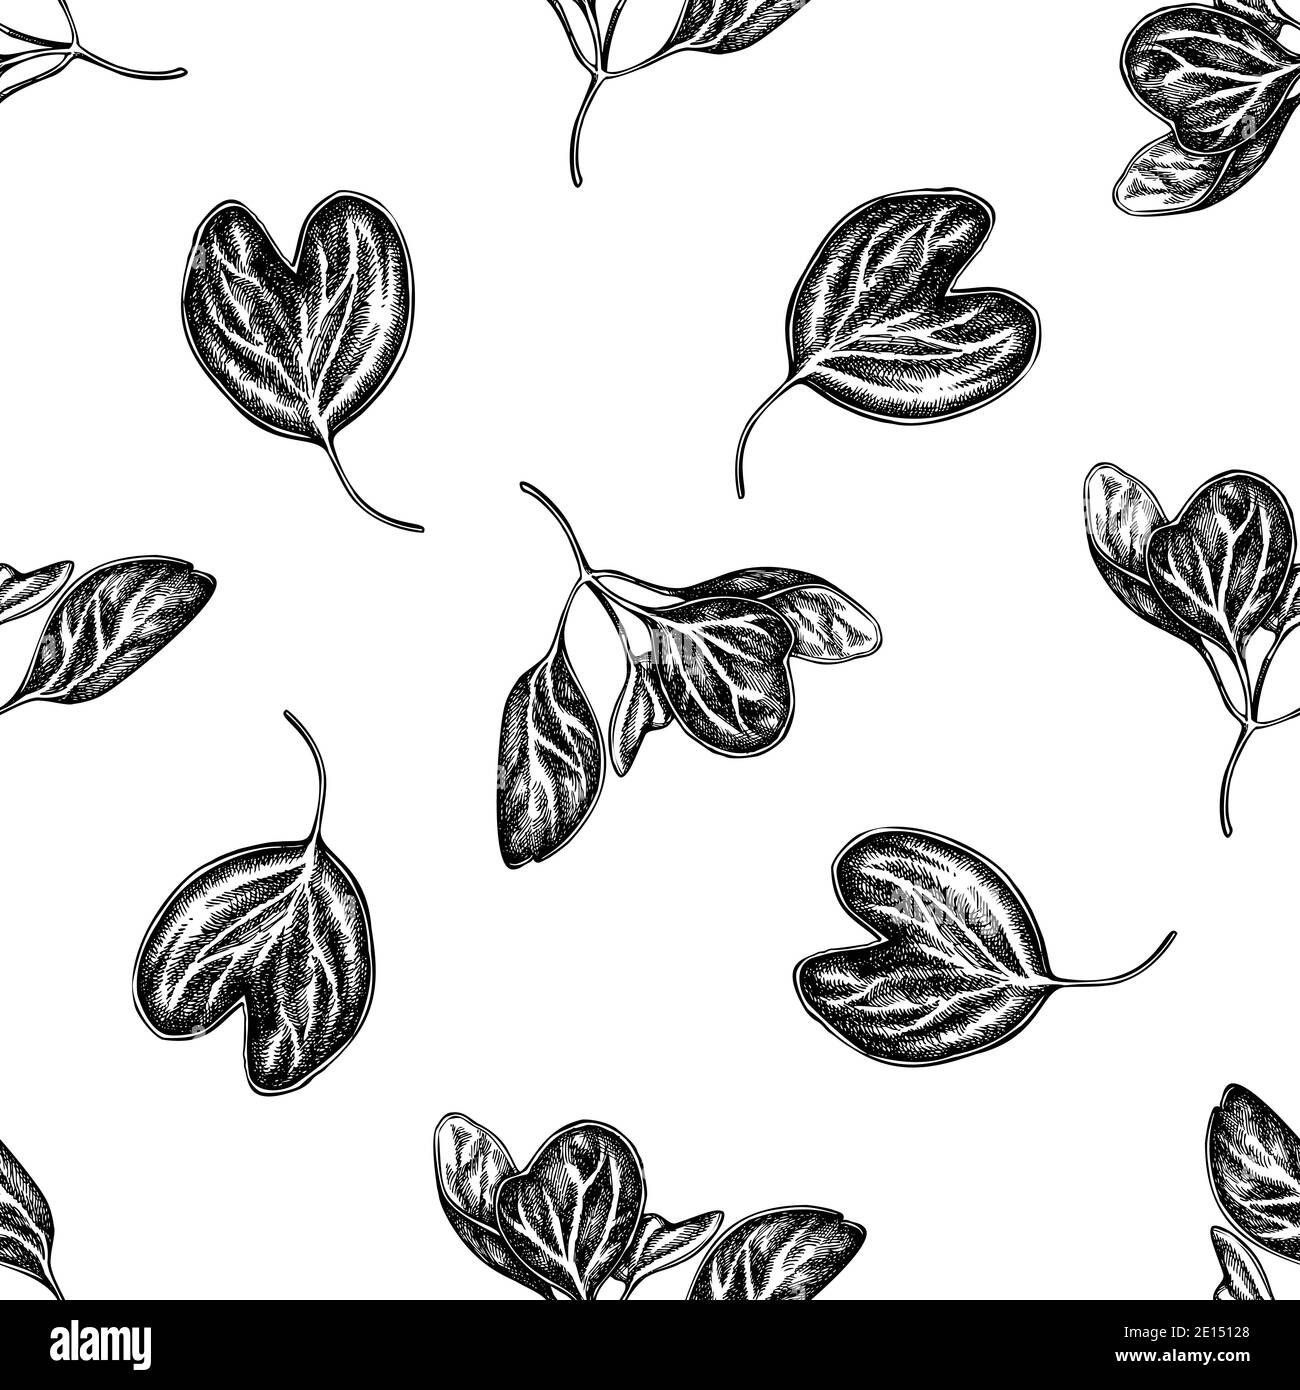 Seamless pattern with black and white iresine Stock Vector